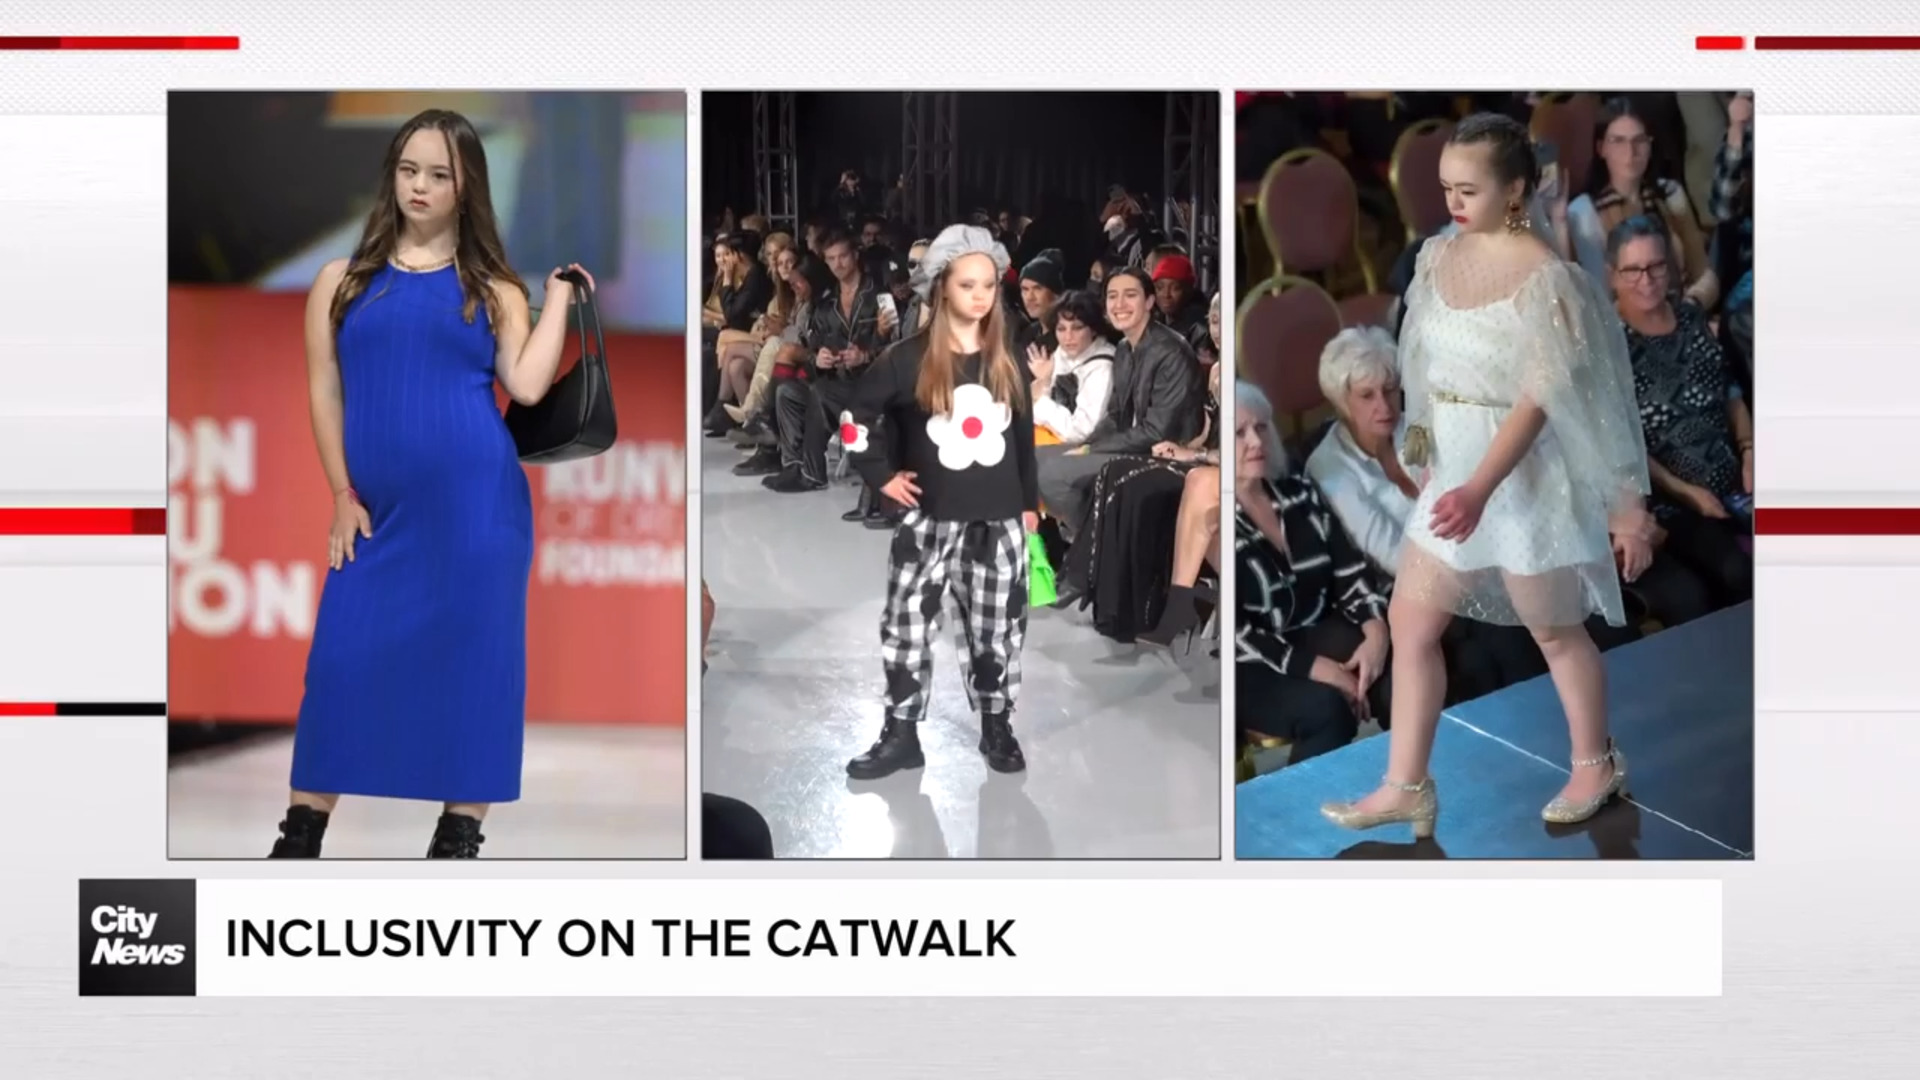 Breaking stereotypes on the catwalk